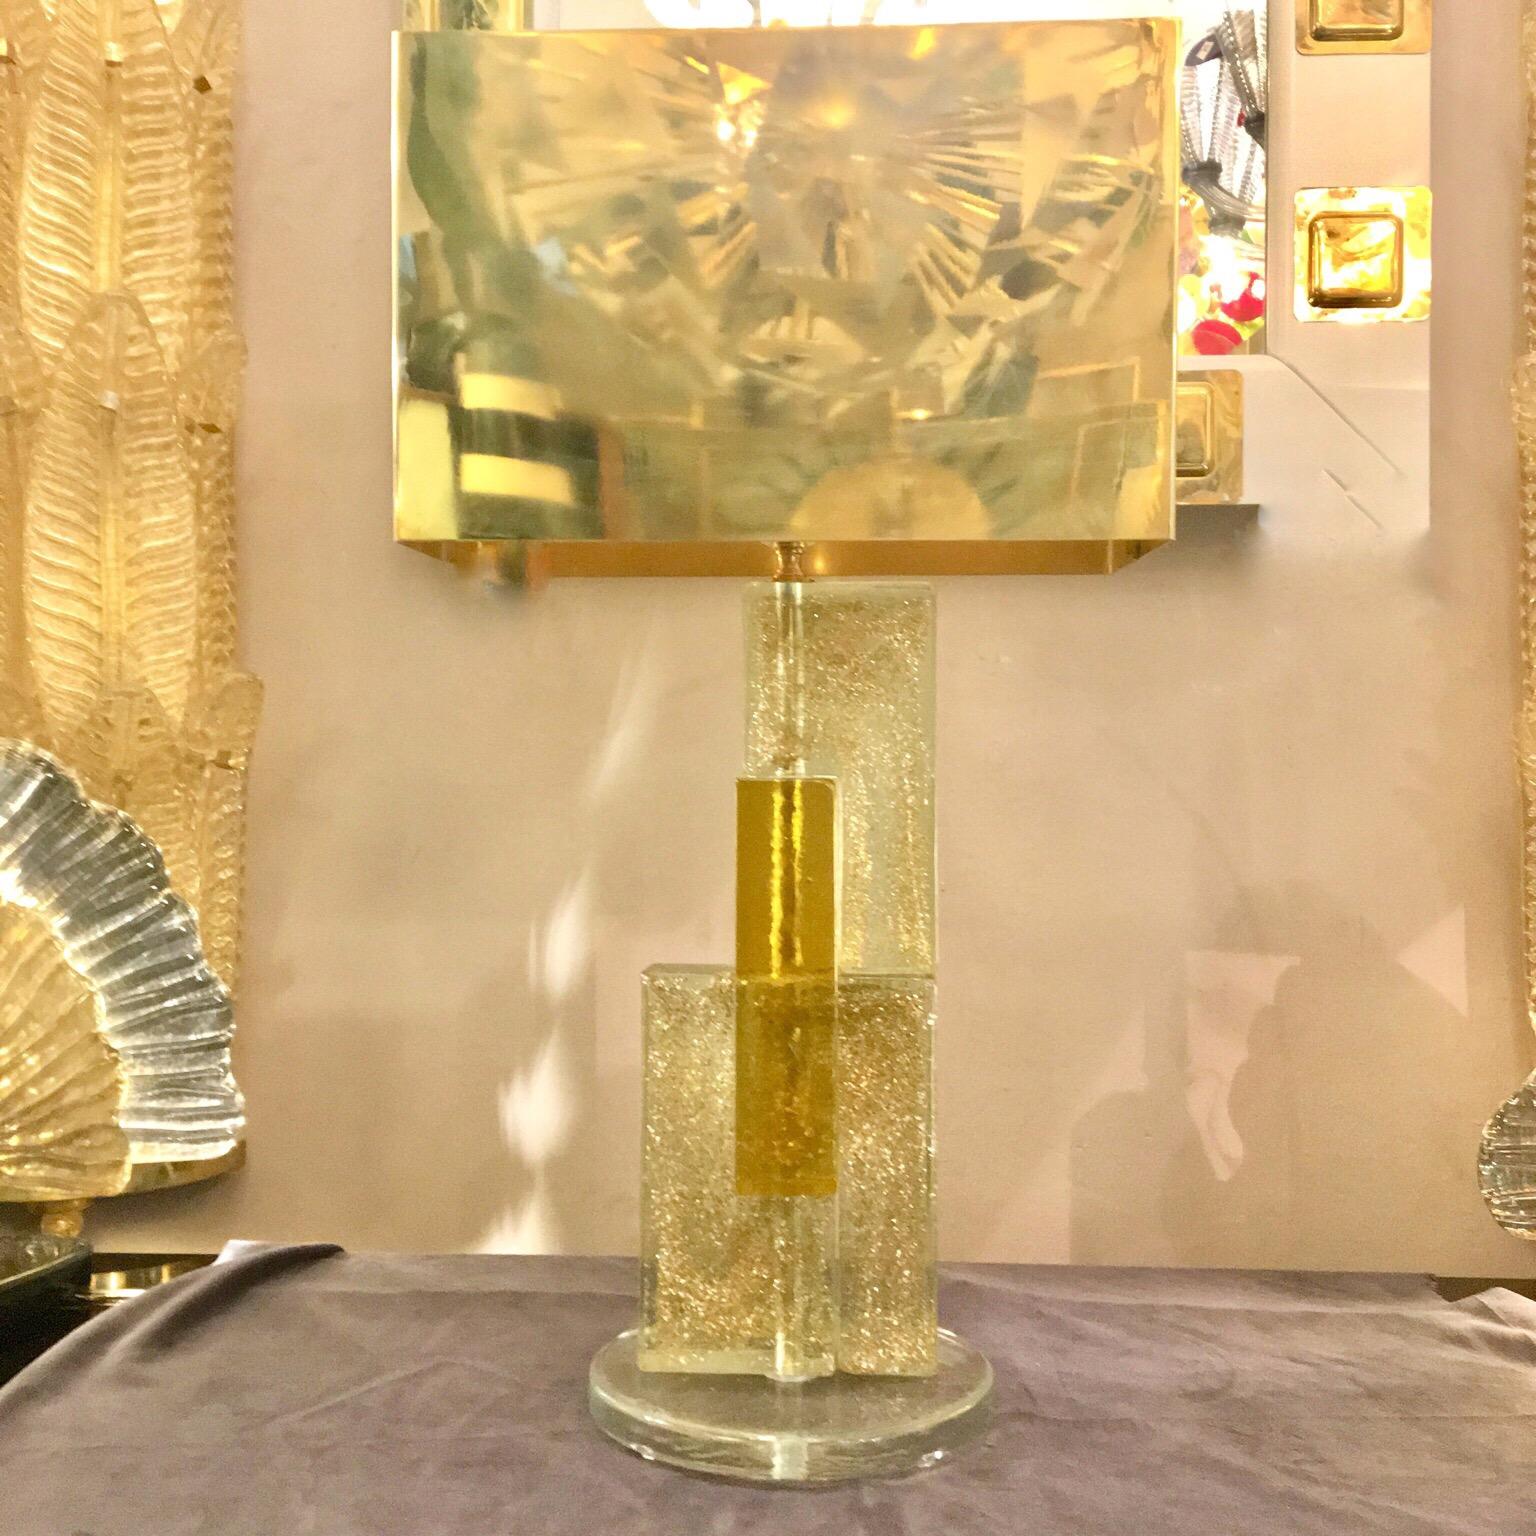 Pair of handcrafted Murano glass lamps, yellow glass and clear glass infused with gold flecks, rectangular brass lampshades. Round clear glass base. One bulb each lamp.